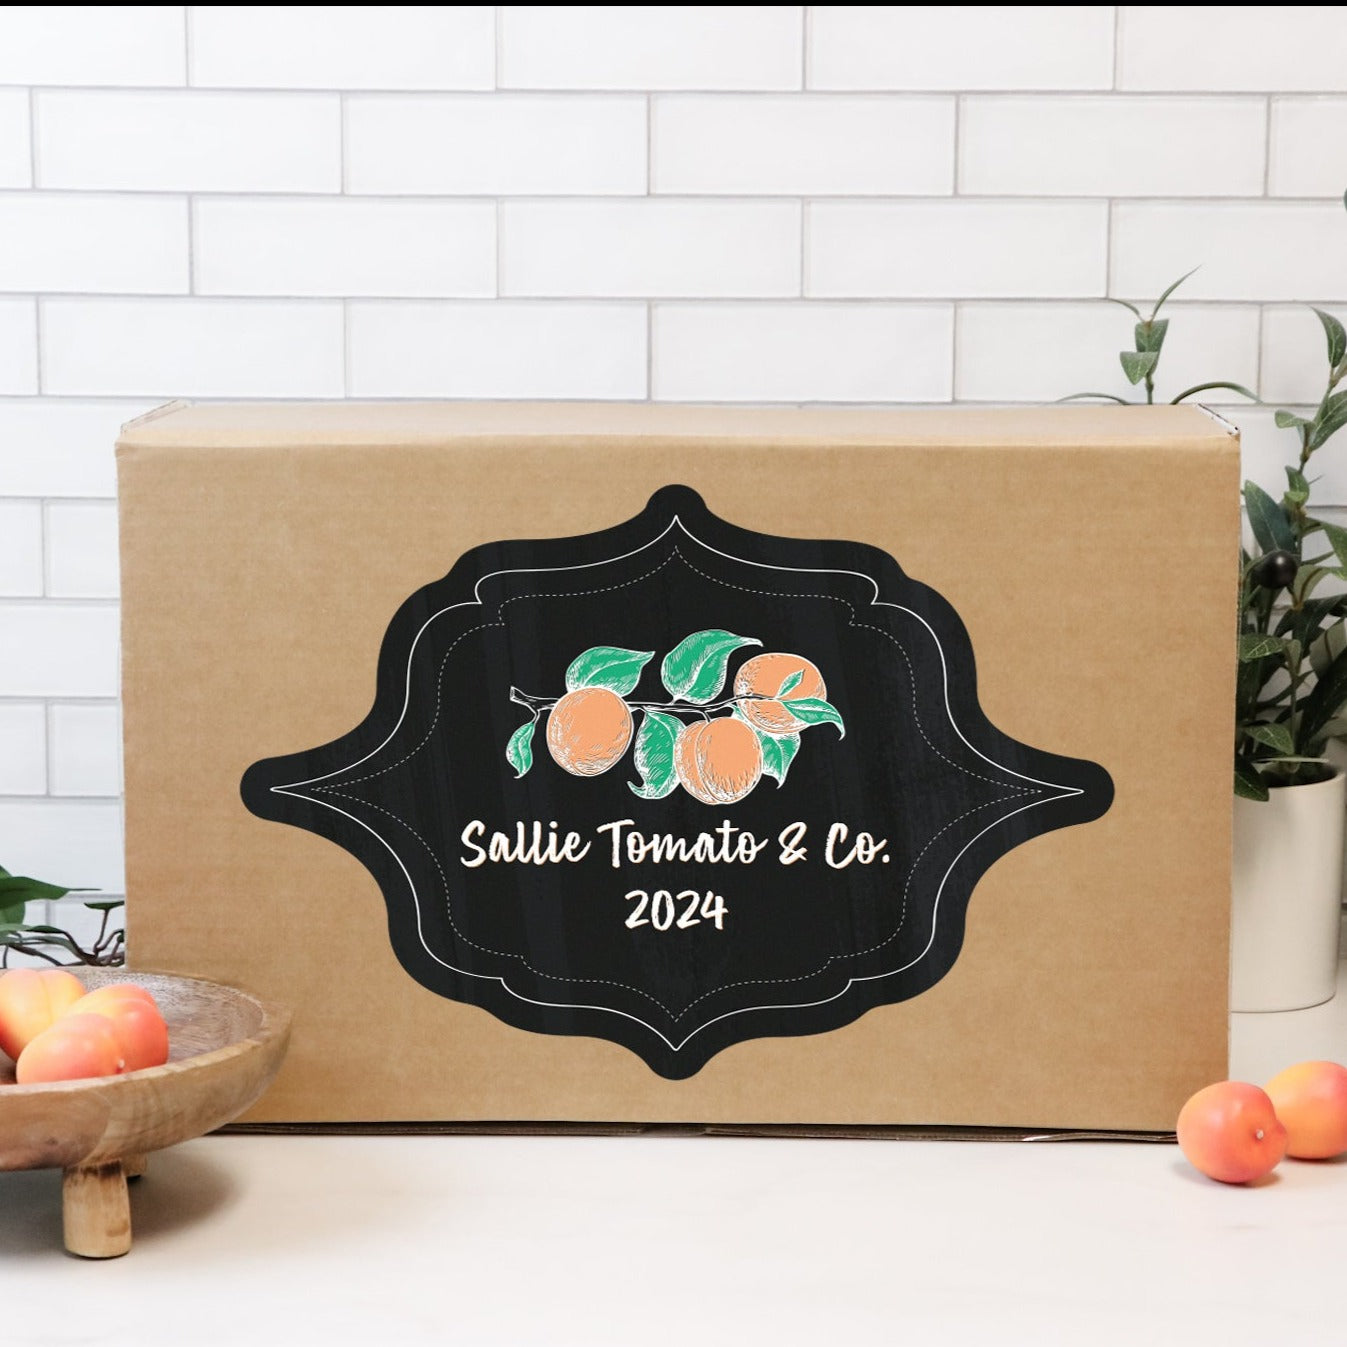 Preorder LIMITED EDITION Sallie Tomato & Co. Box 2024